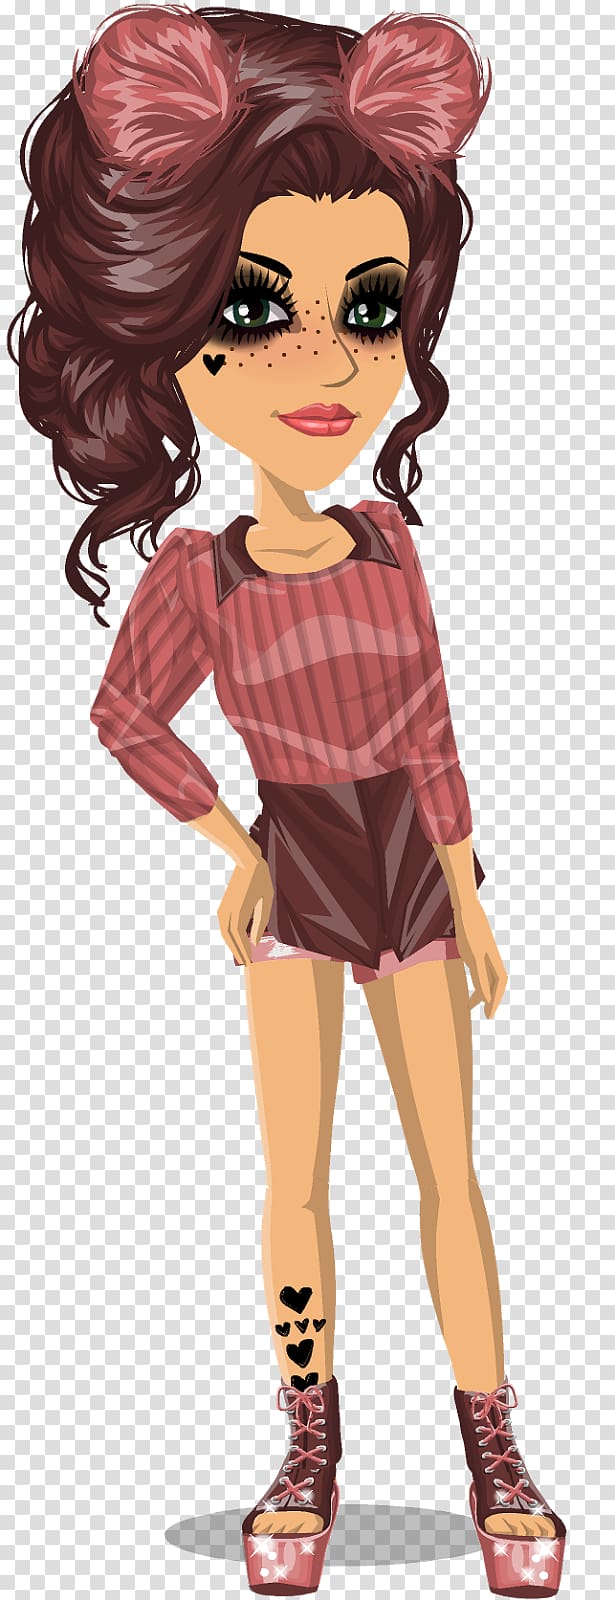 MovieStarPlanet Character design Animation, autumn clothes transparent background PNG clipart